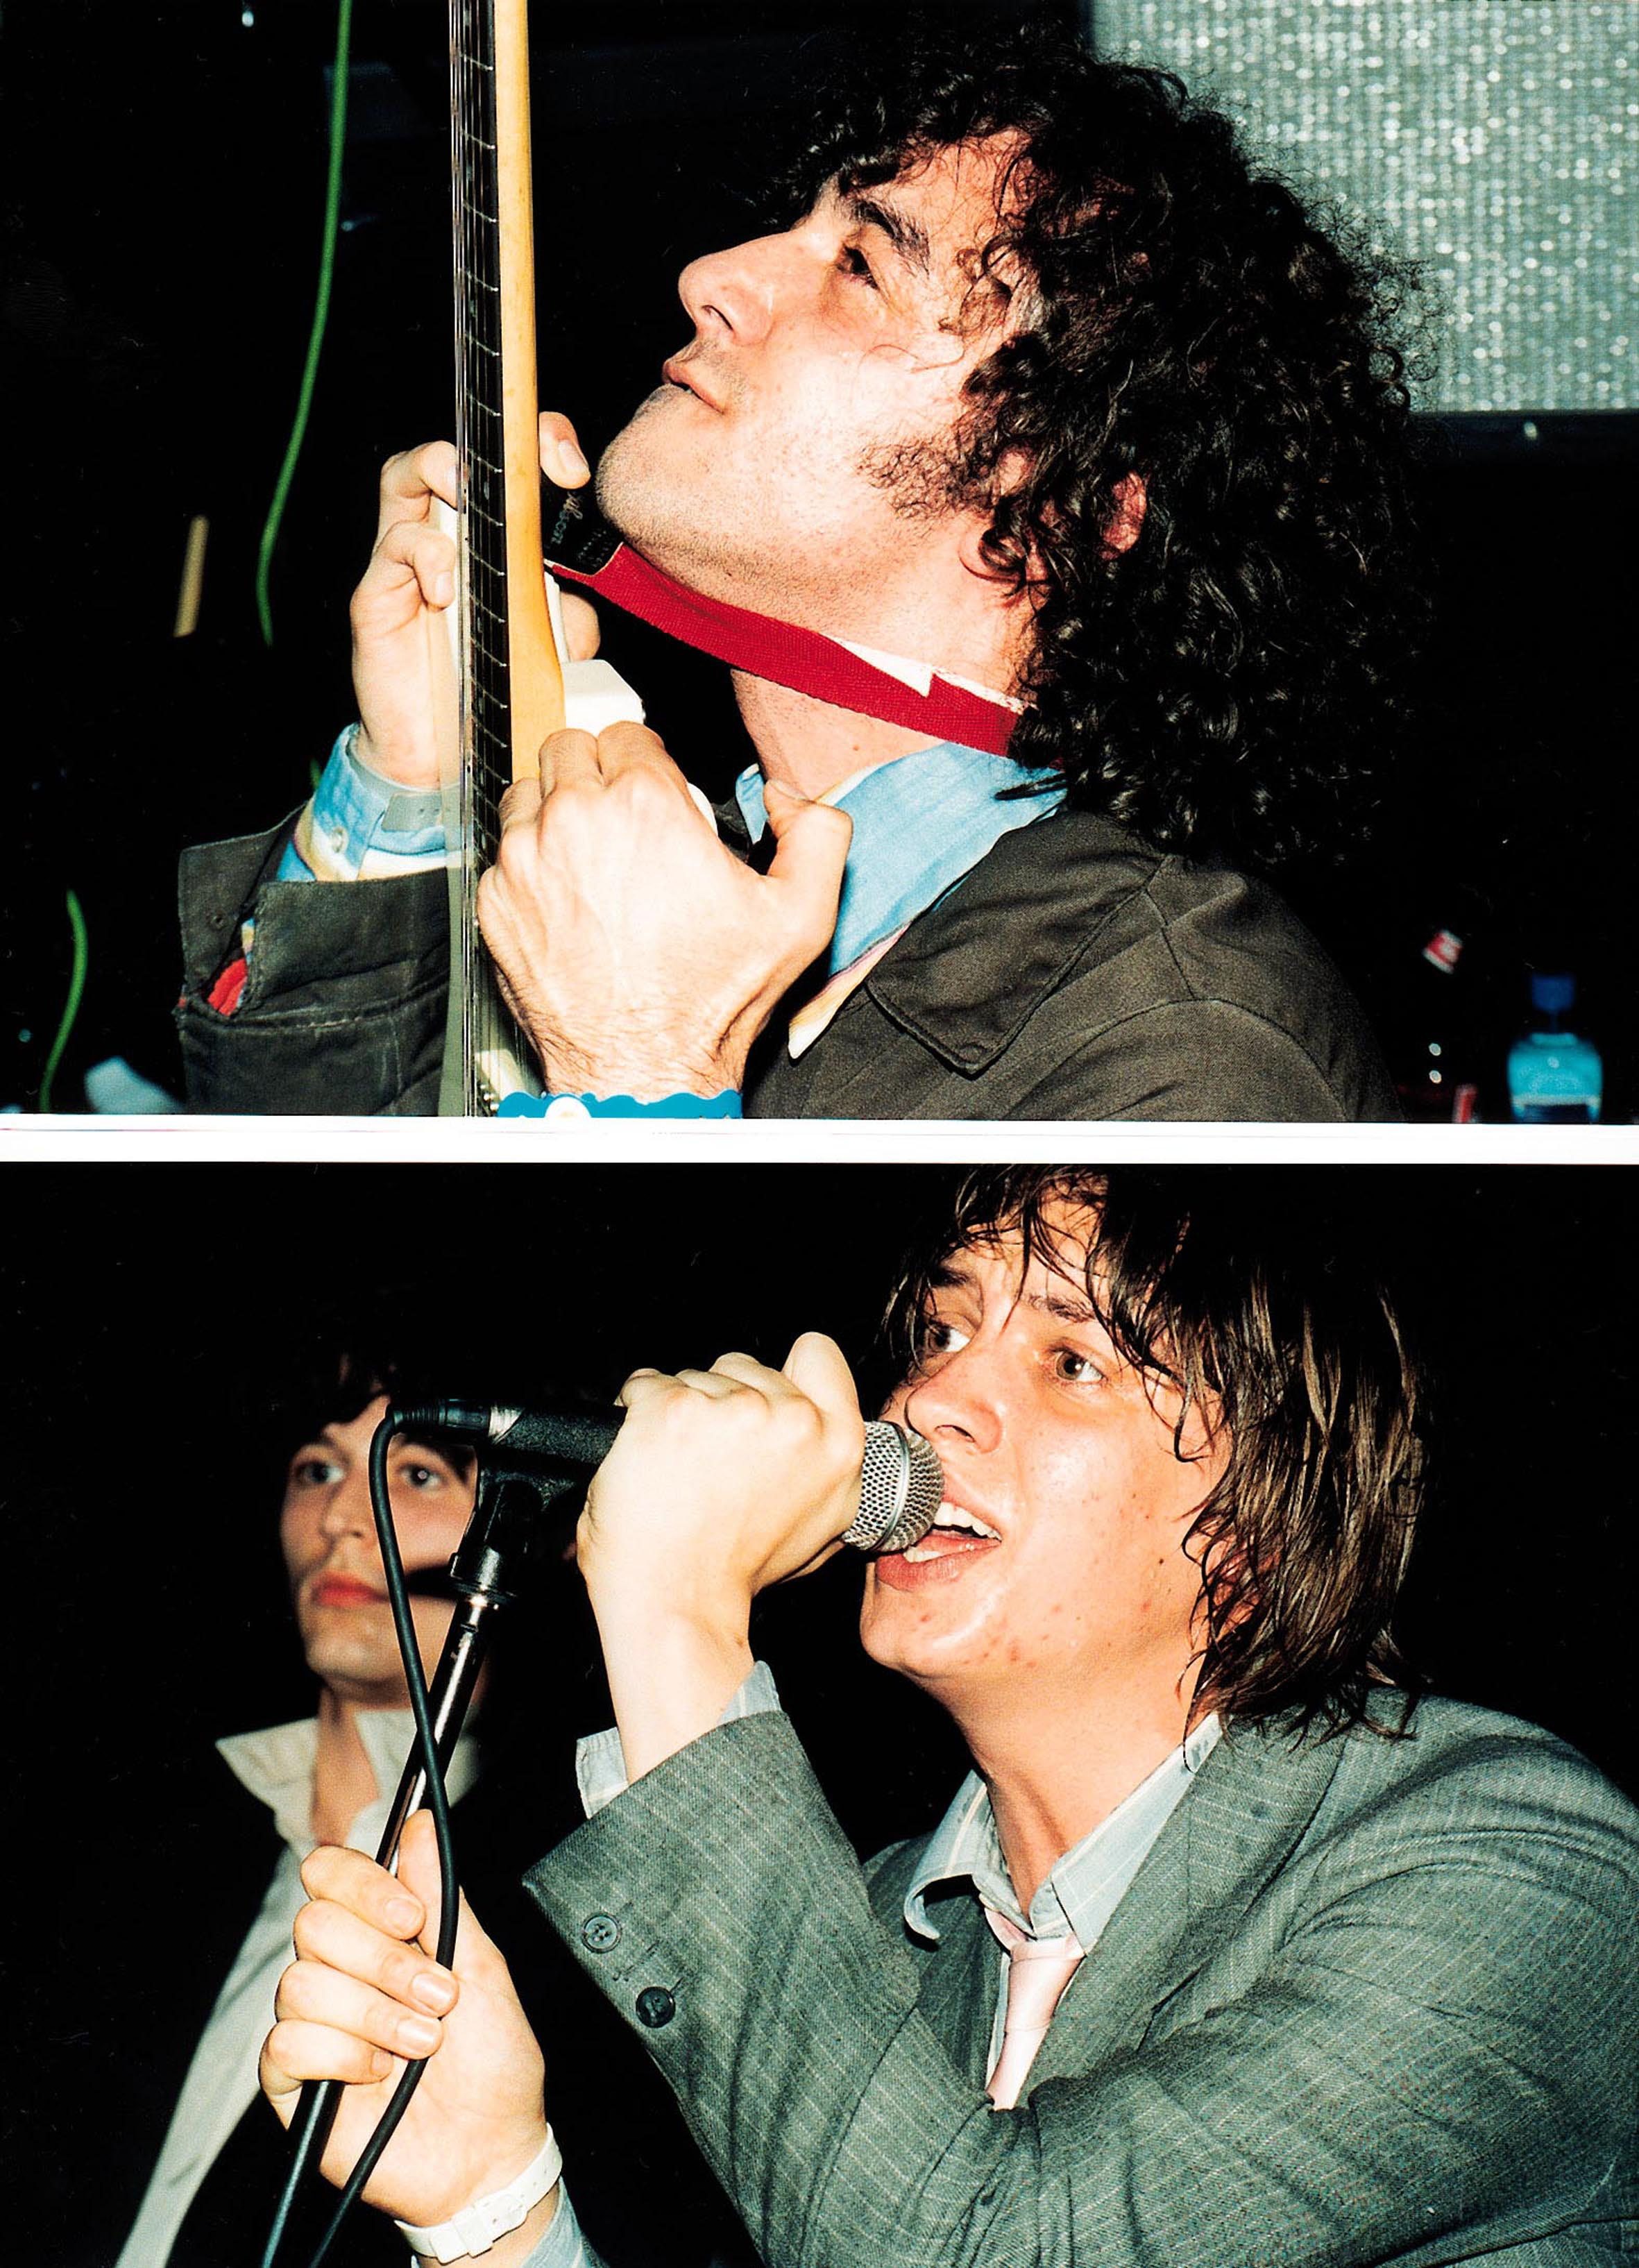 The Strokes on their first British tour at Clwb Ifor Bach in Cardiff, 2001.